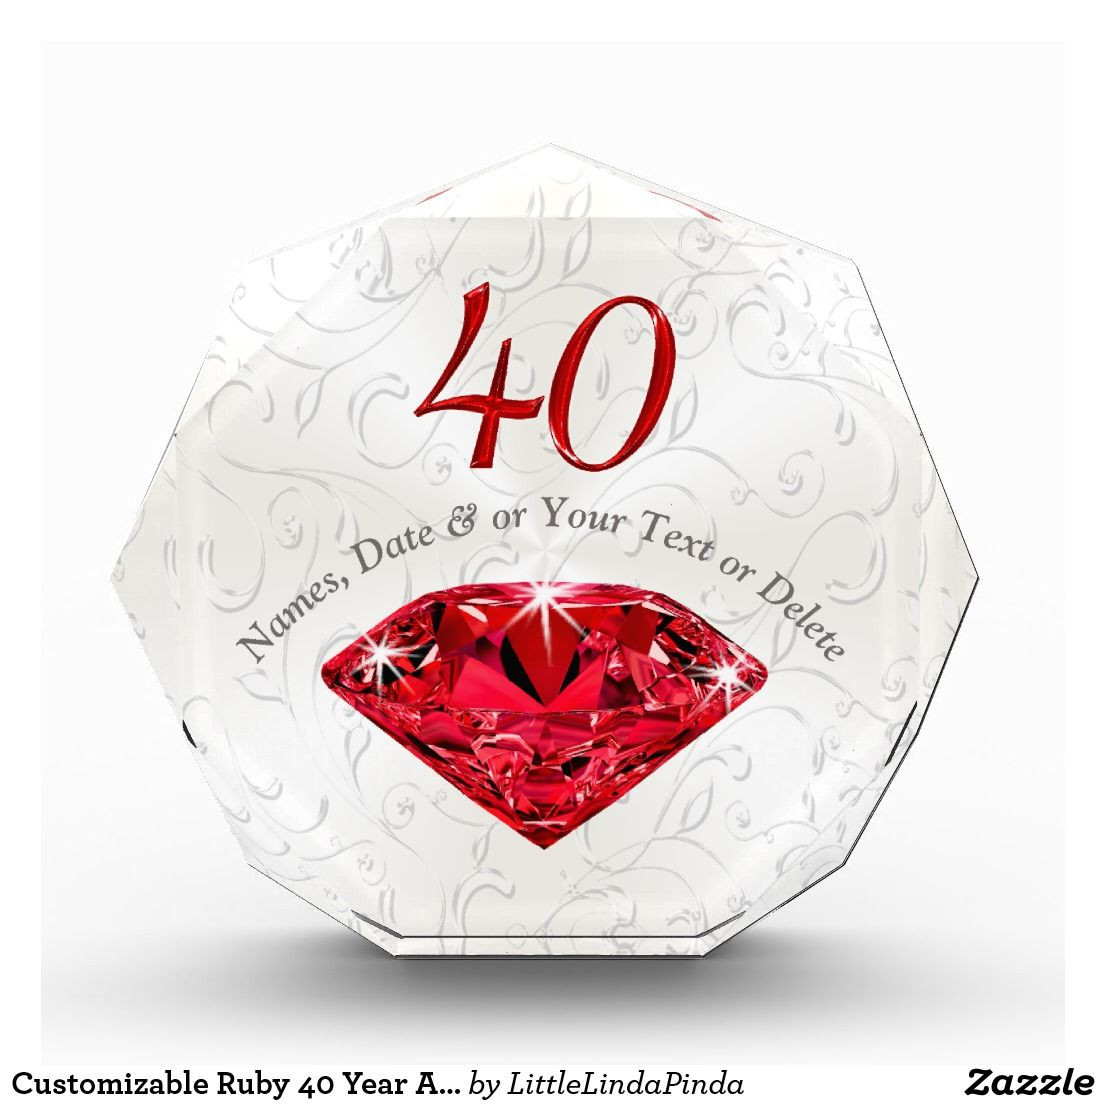 40 Year Wedding Anniversary Gift Ideas
 Pin on 40th Anniversary Gifts PERSONALIZED